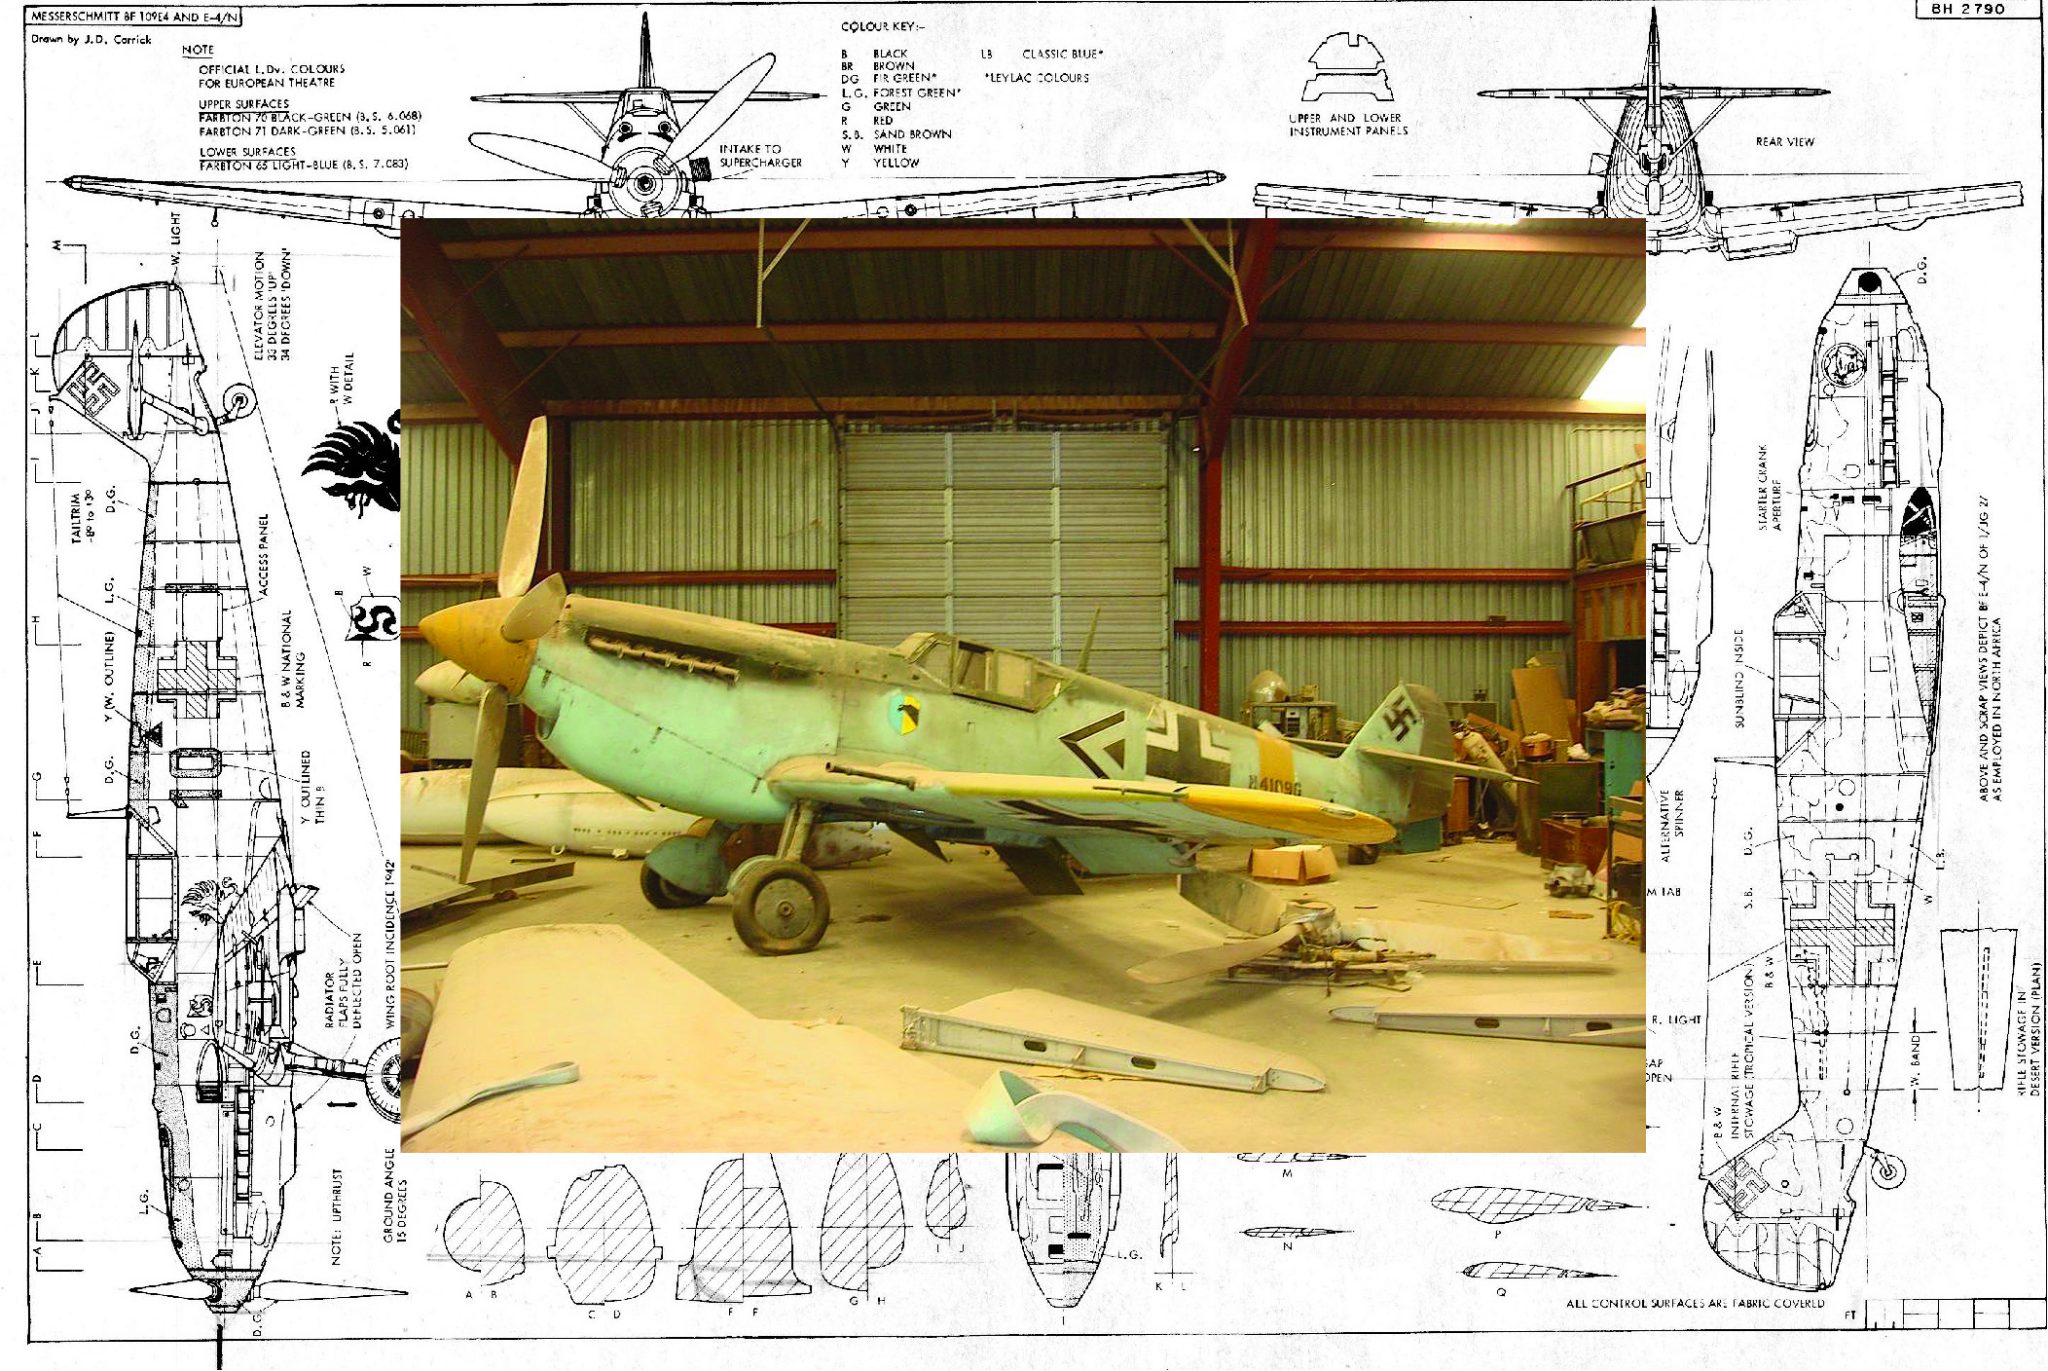 BF-109: The Most Legendary Aircraft of WW2 #shorts #history #ww2